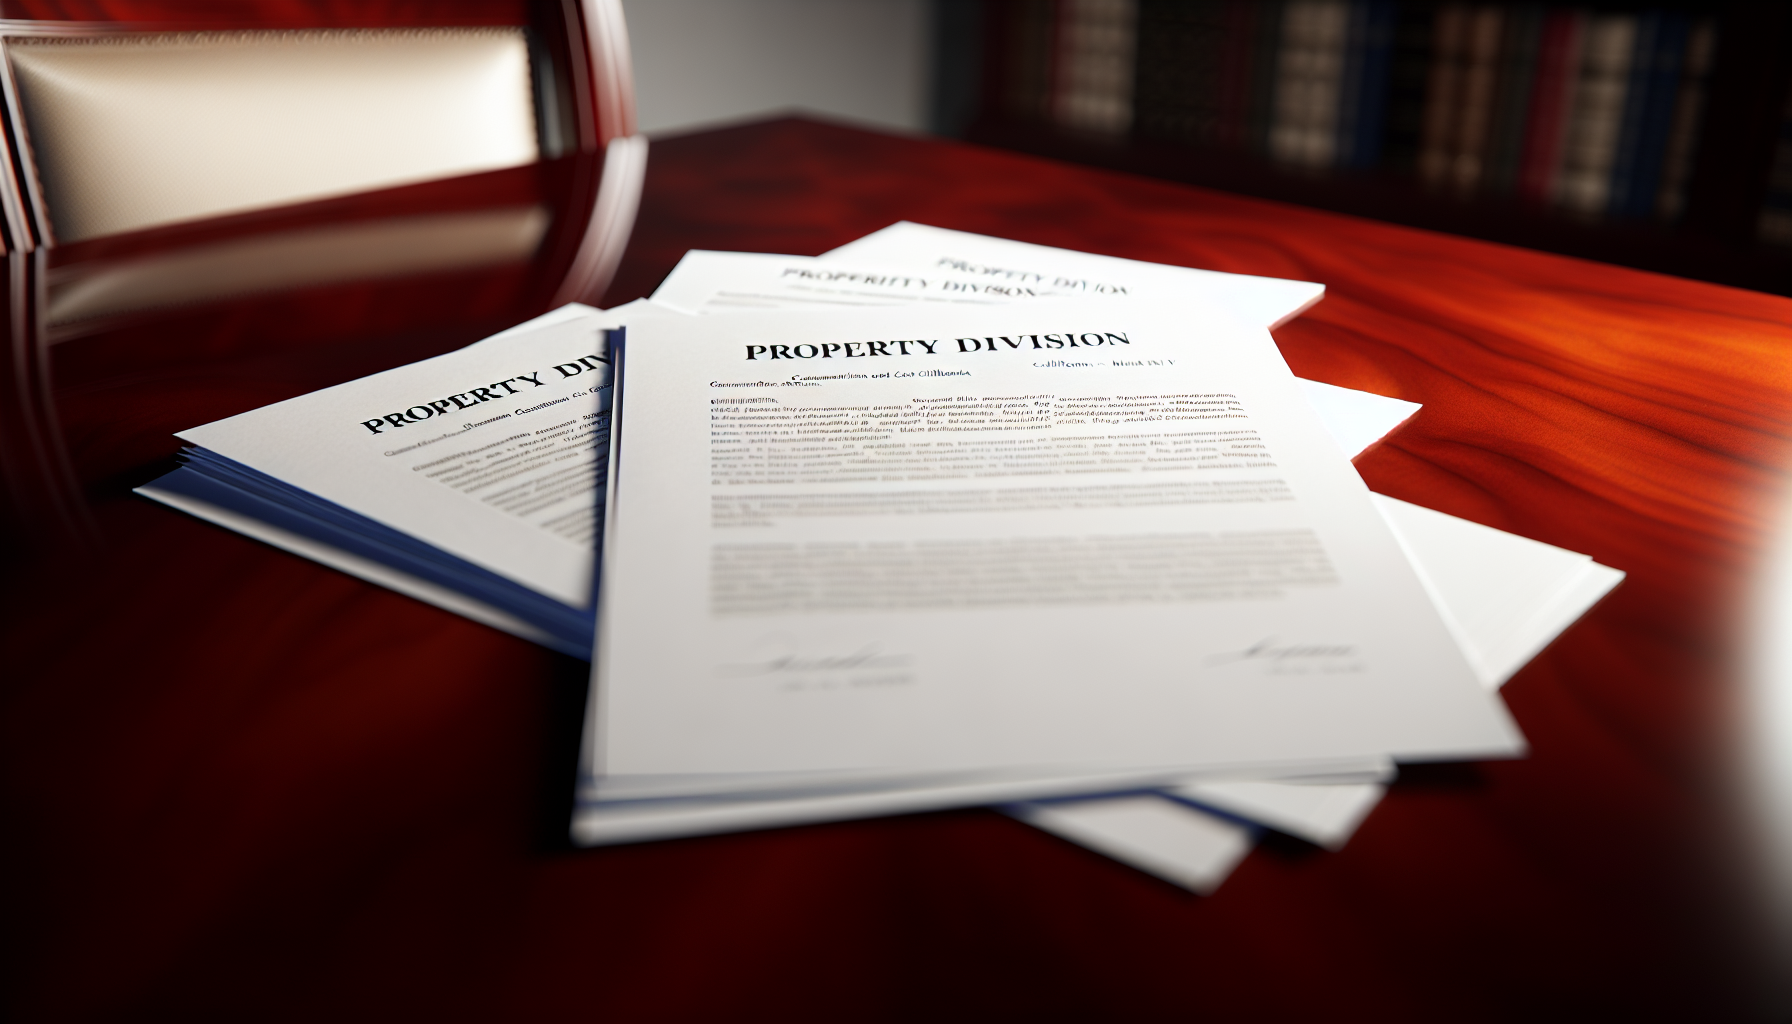 Photo of property division documents symbolizing California's community property laws